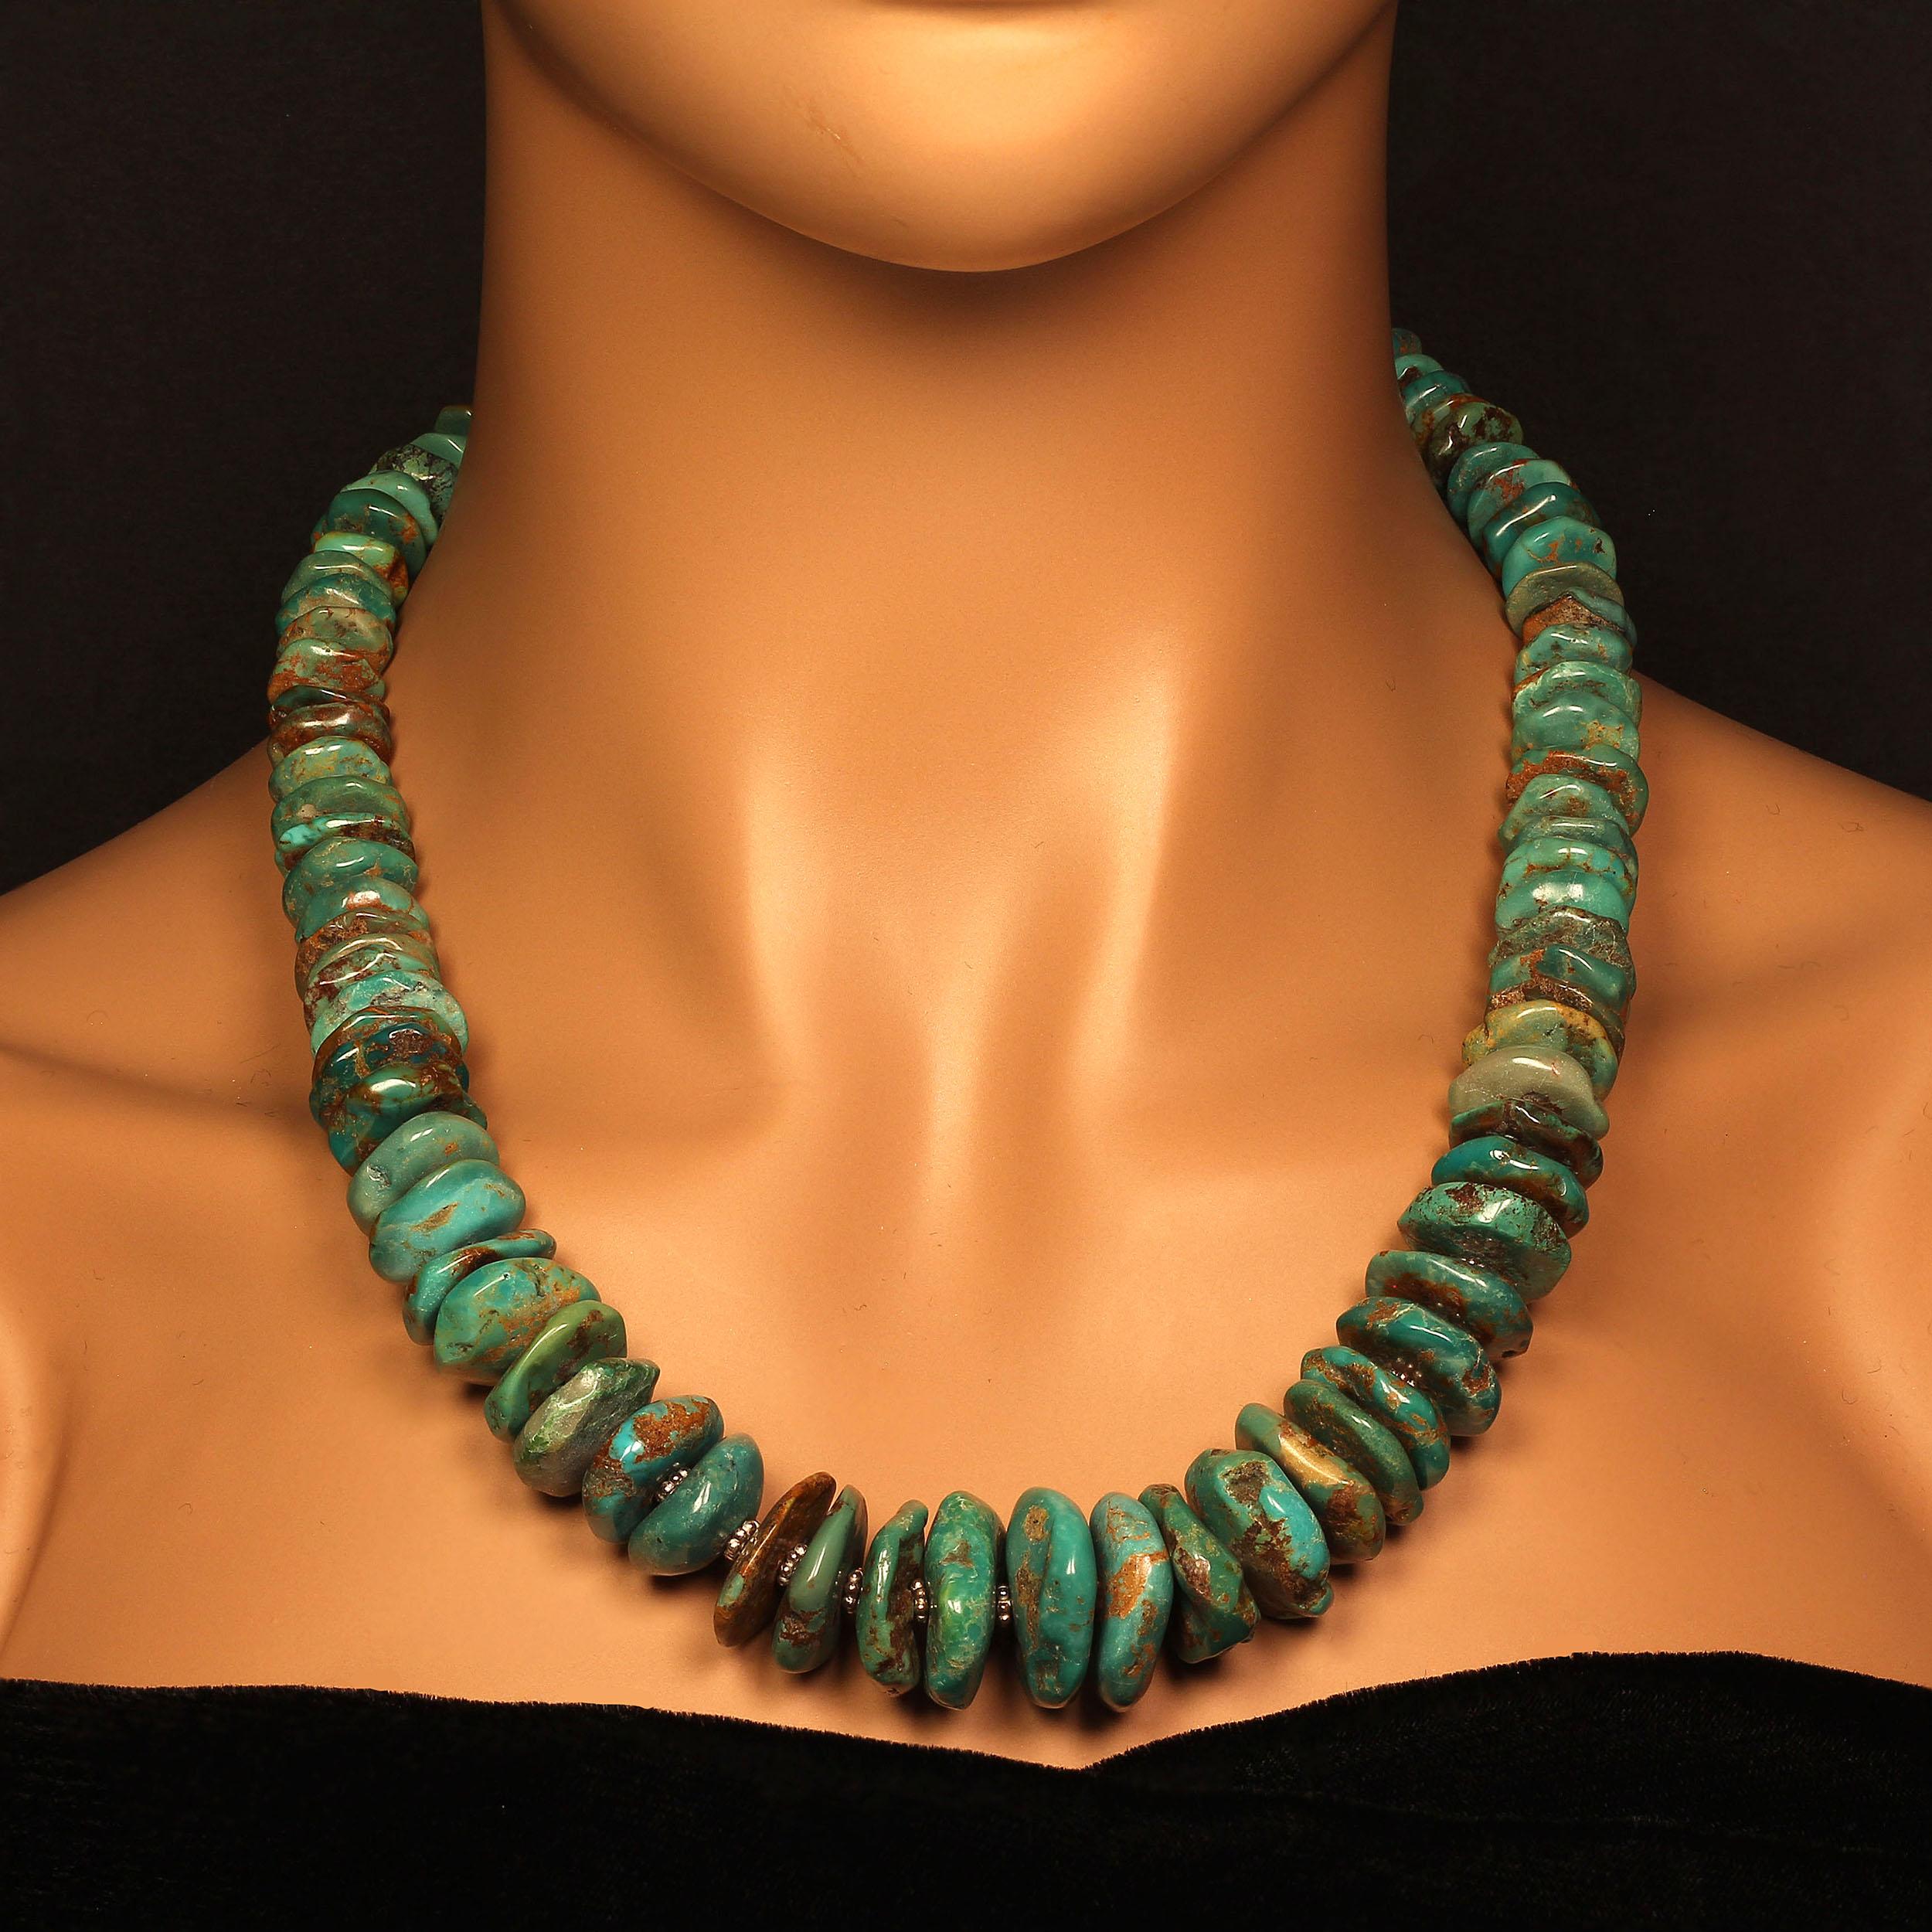 22 inch necklace